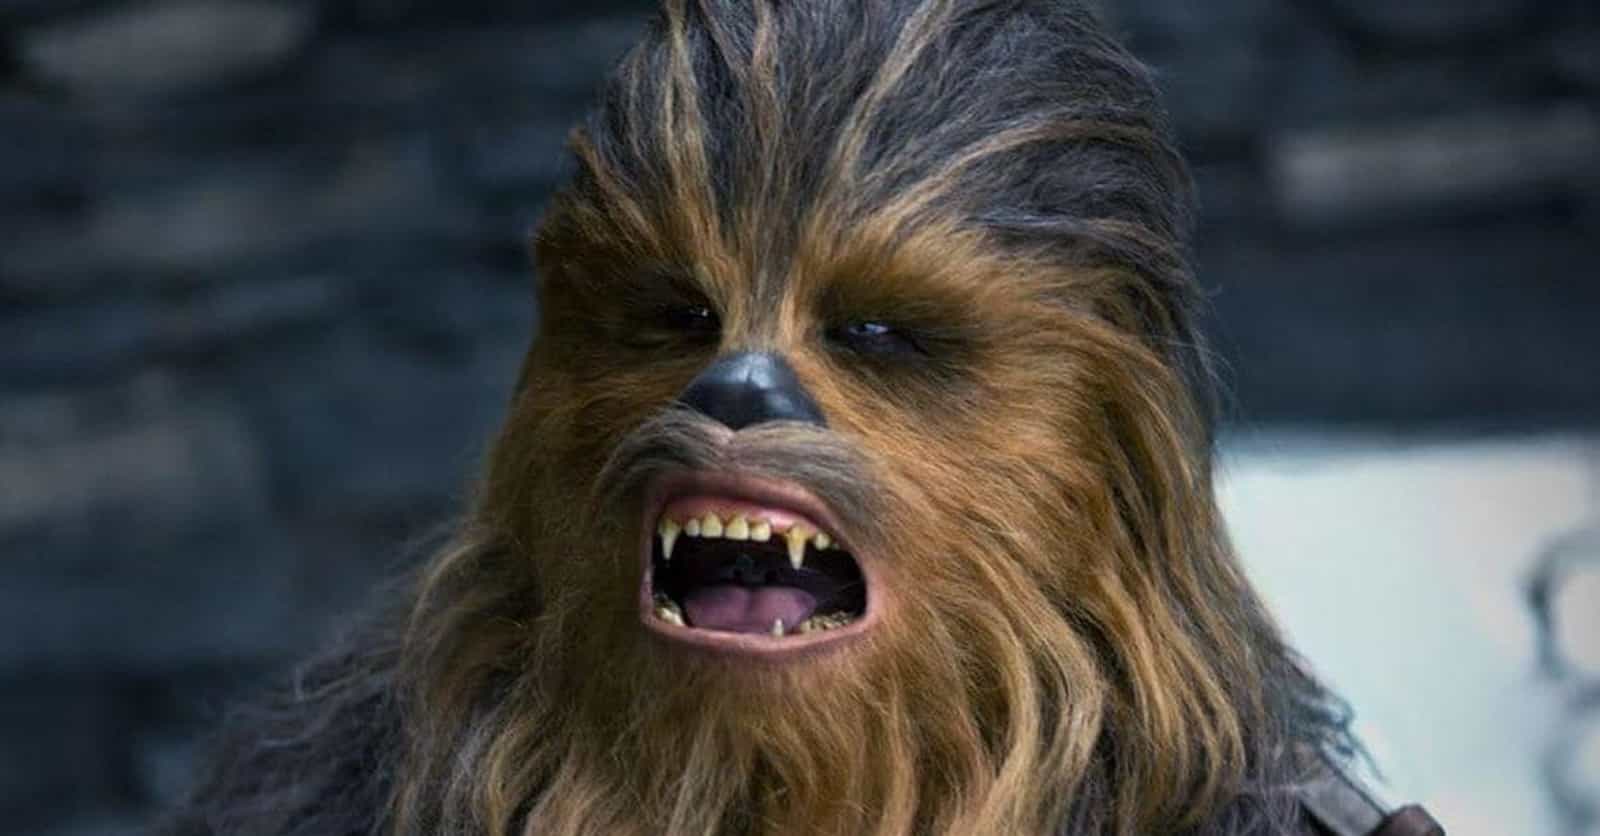 15 Things You Probably Didn't Know About Chewbacca